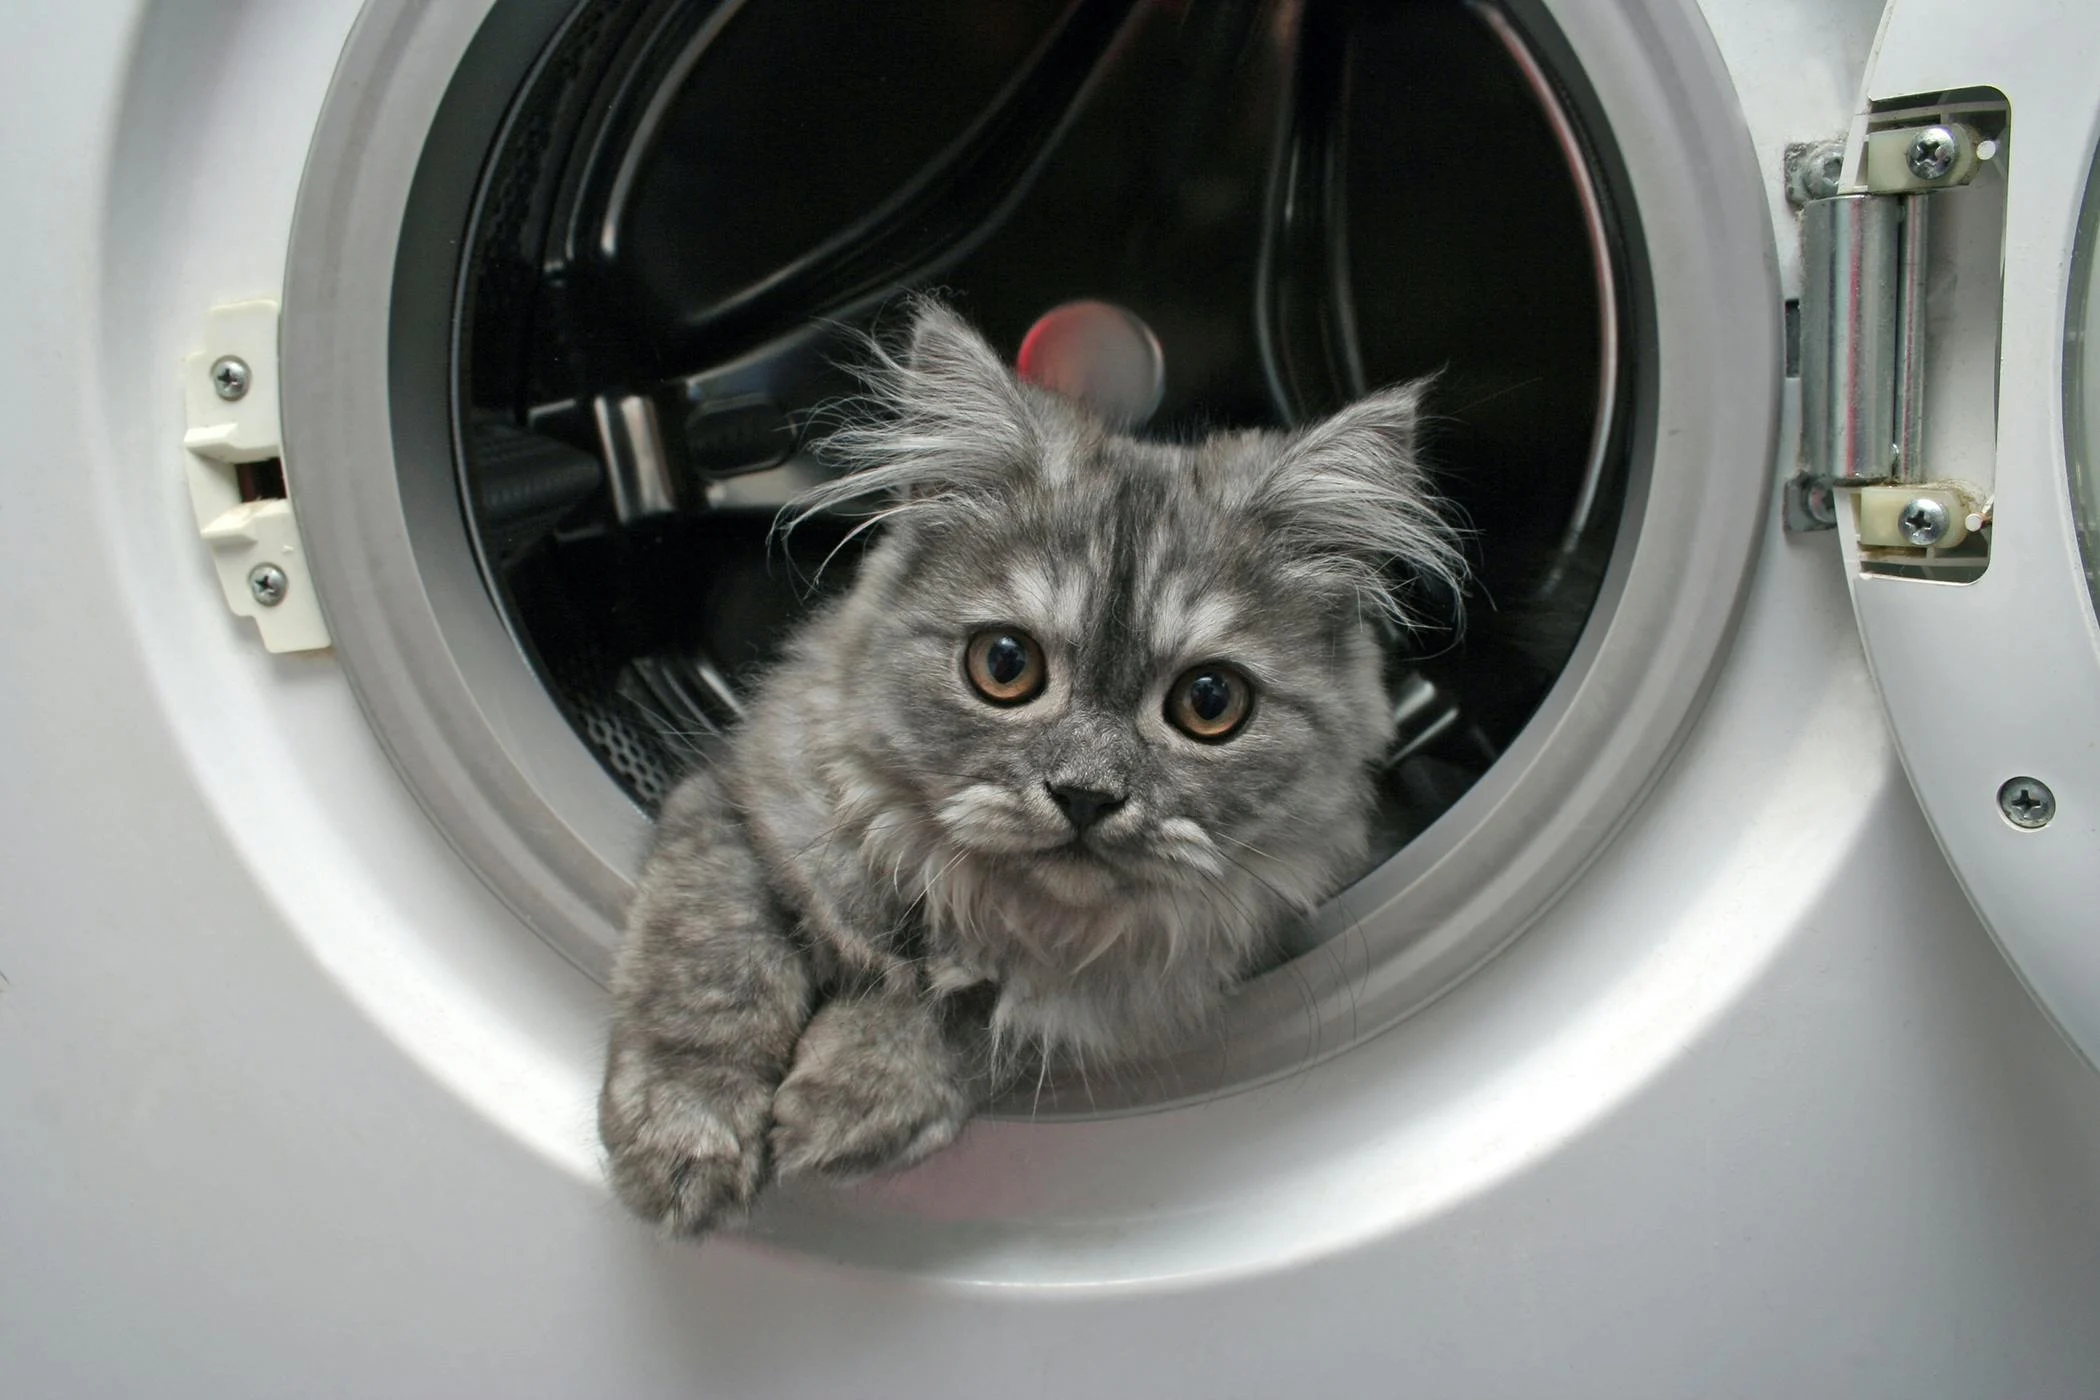 How To Train Your Cat To Stay Away From Washer And Dryer